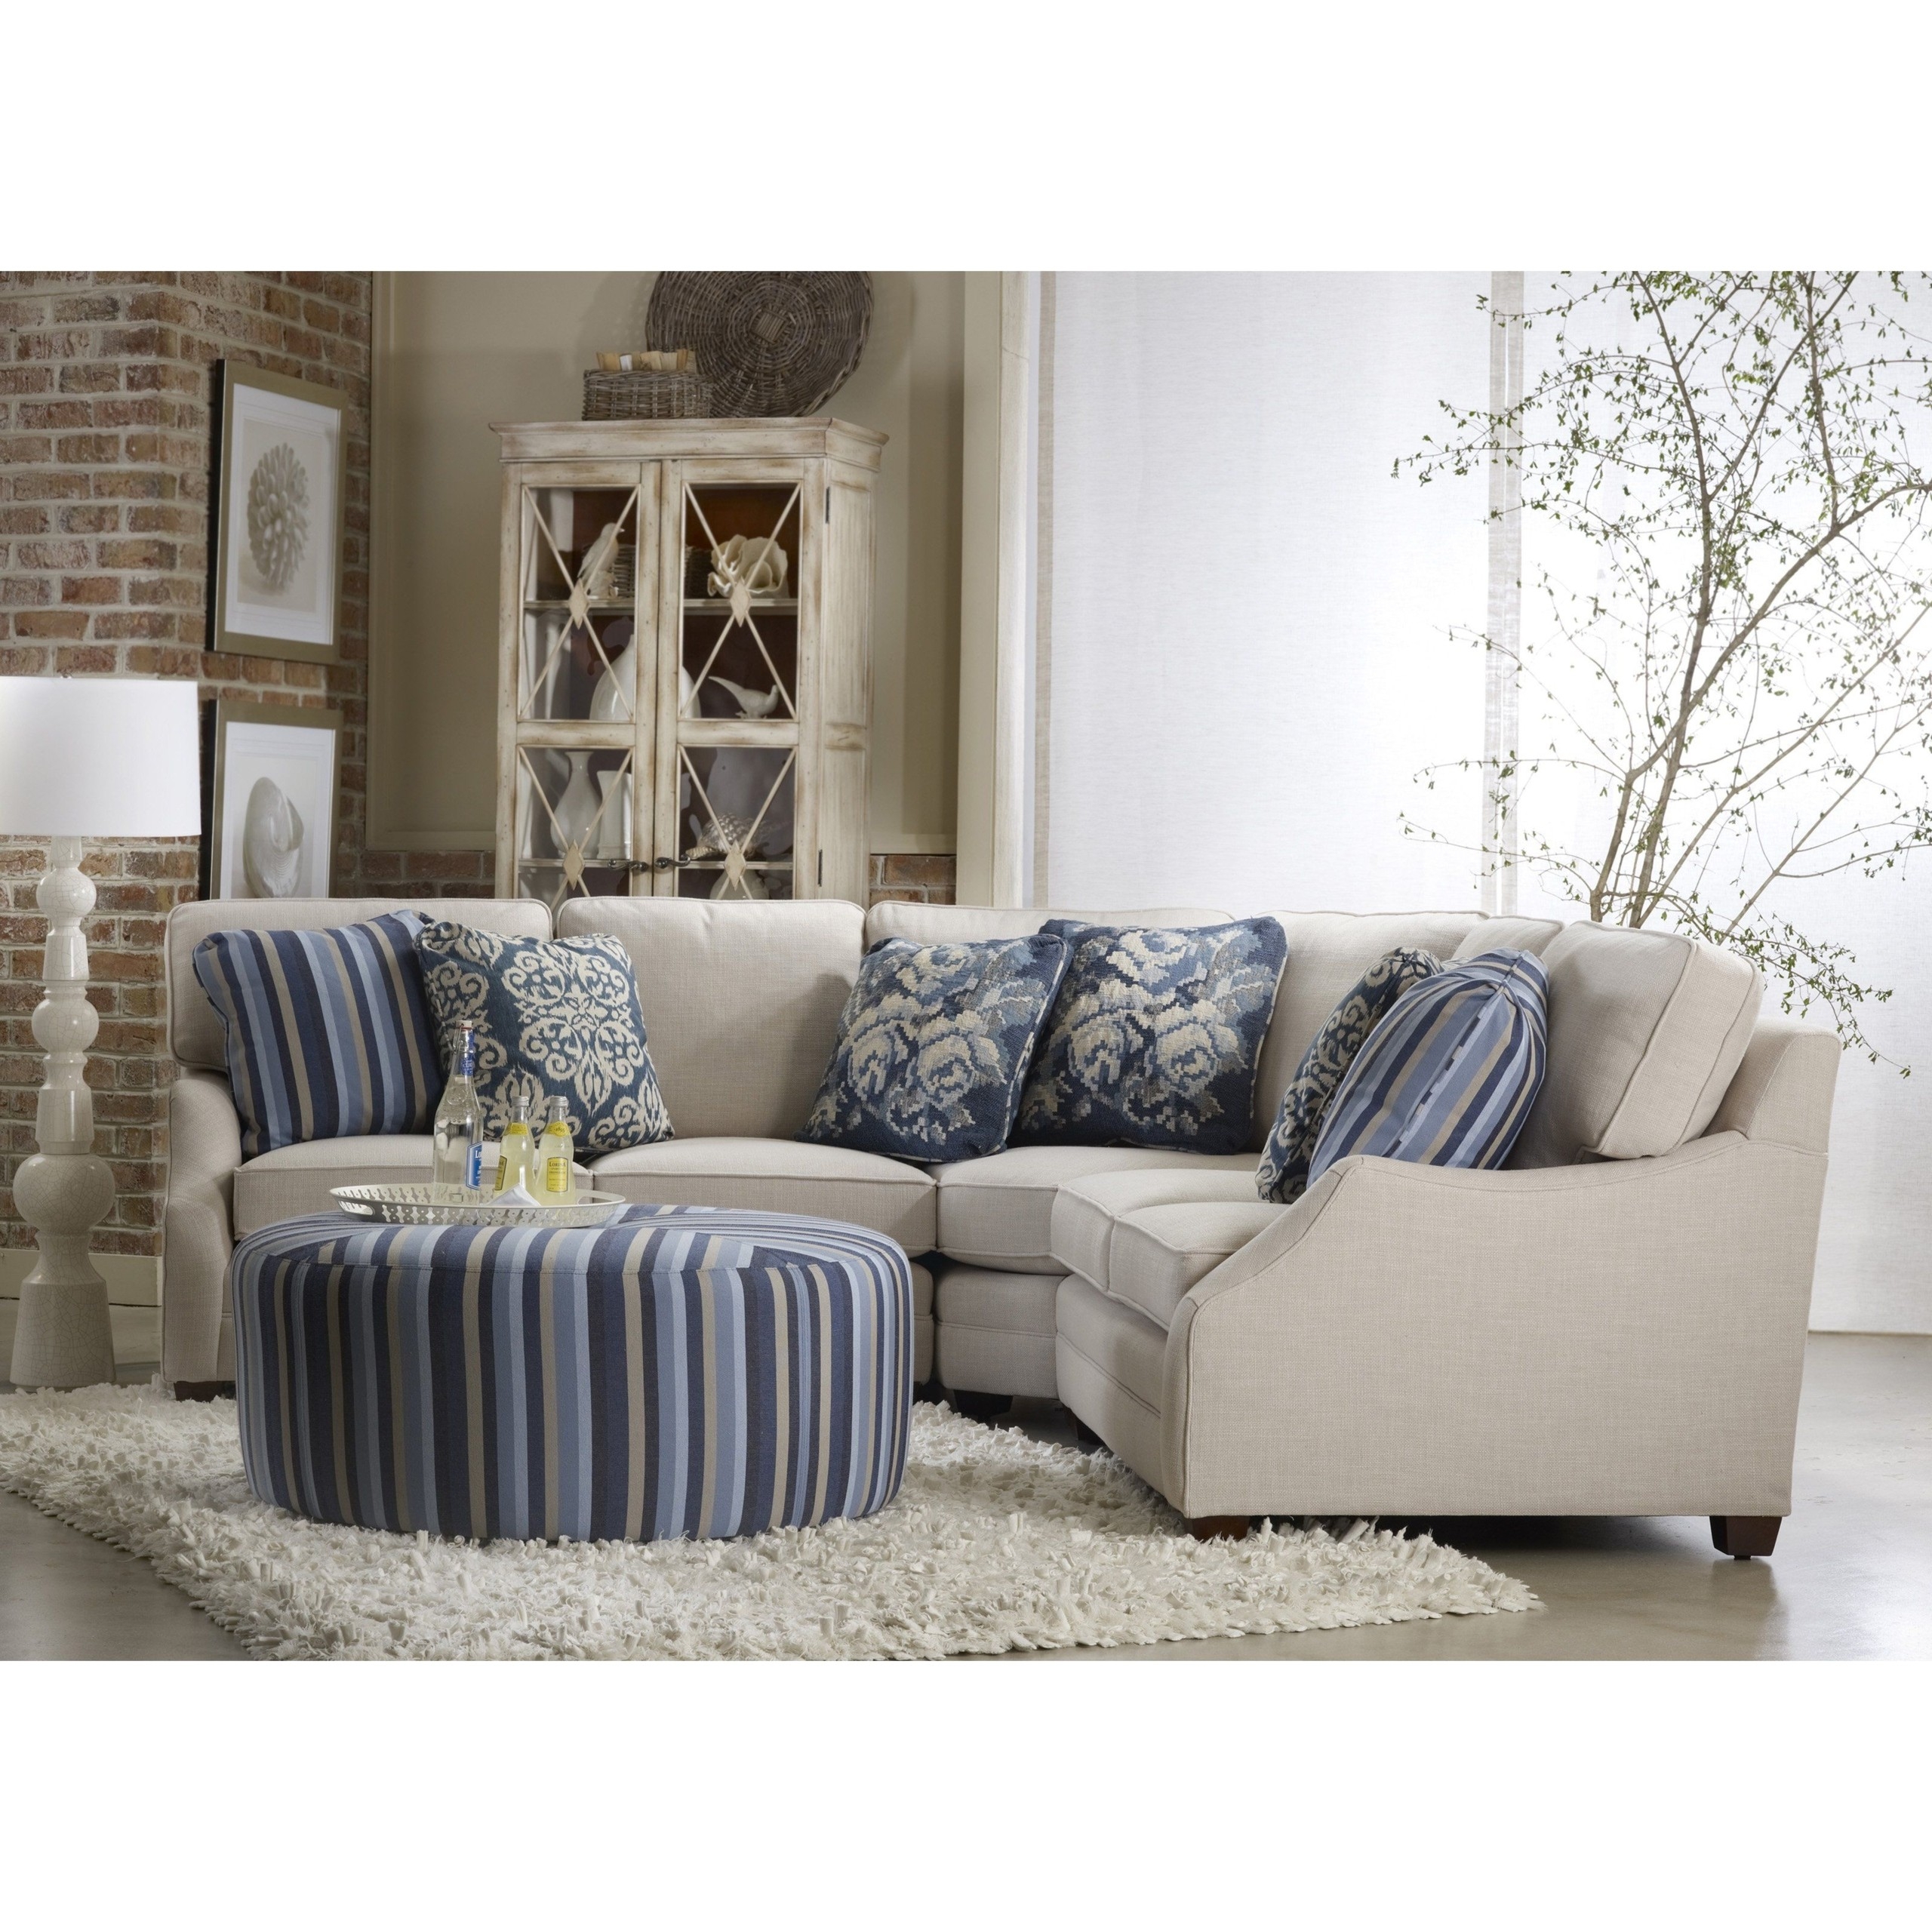 Small Sectional Sofa With Recliner   Ideas on Foter